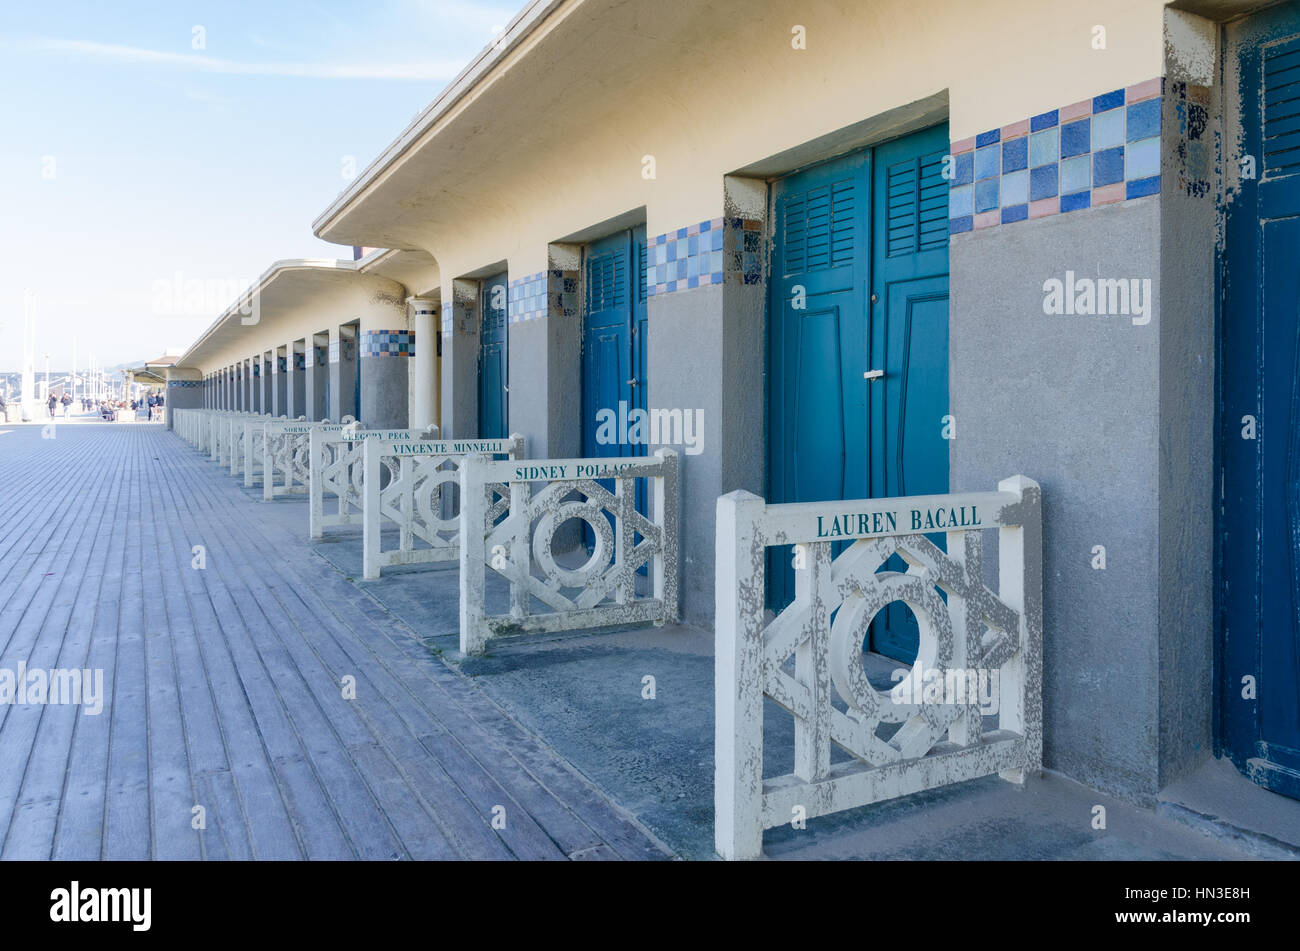 Bathing cabins along Les Planches boardwalk by the beach in the chic french seaside resort of Deauville Stock Photo